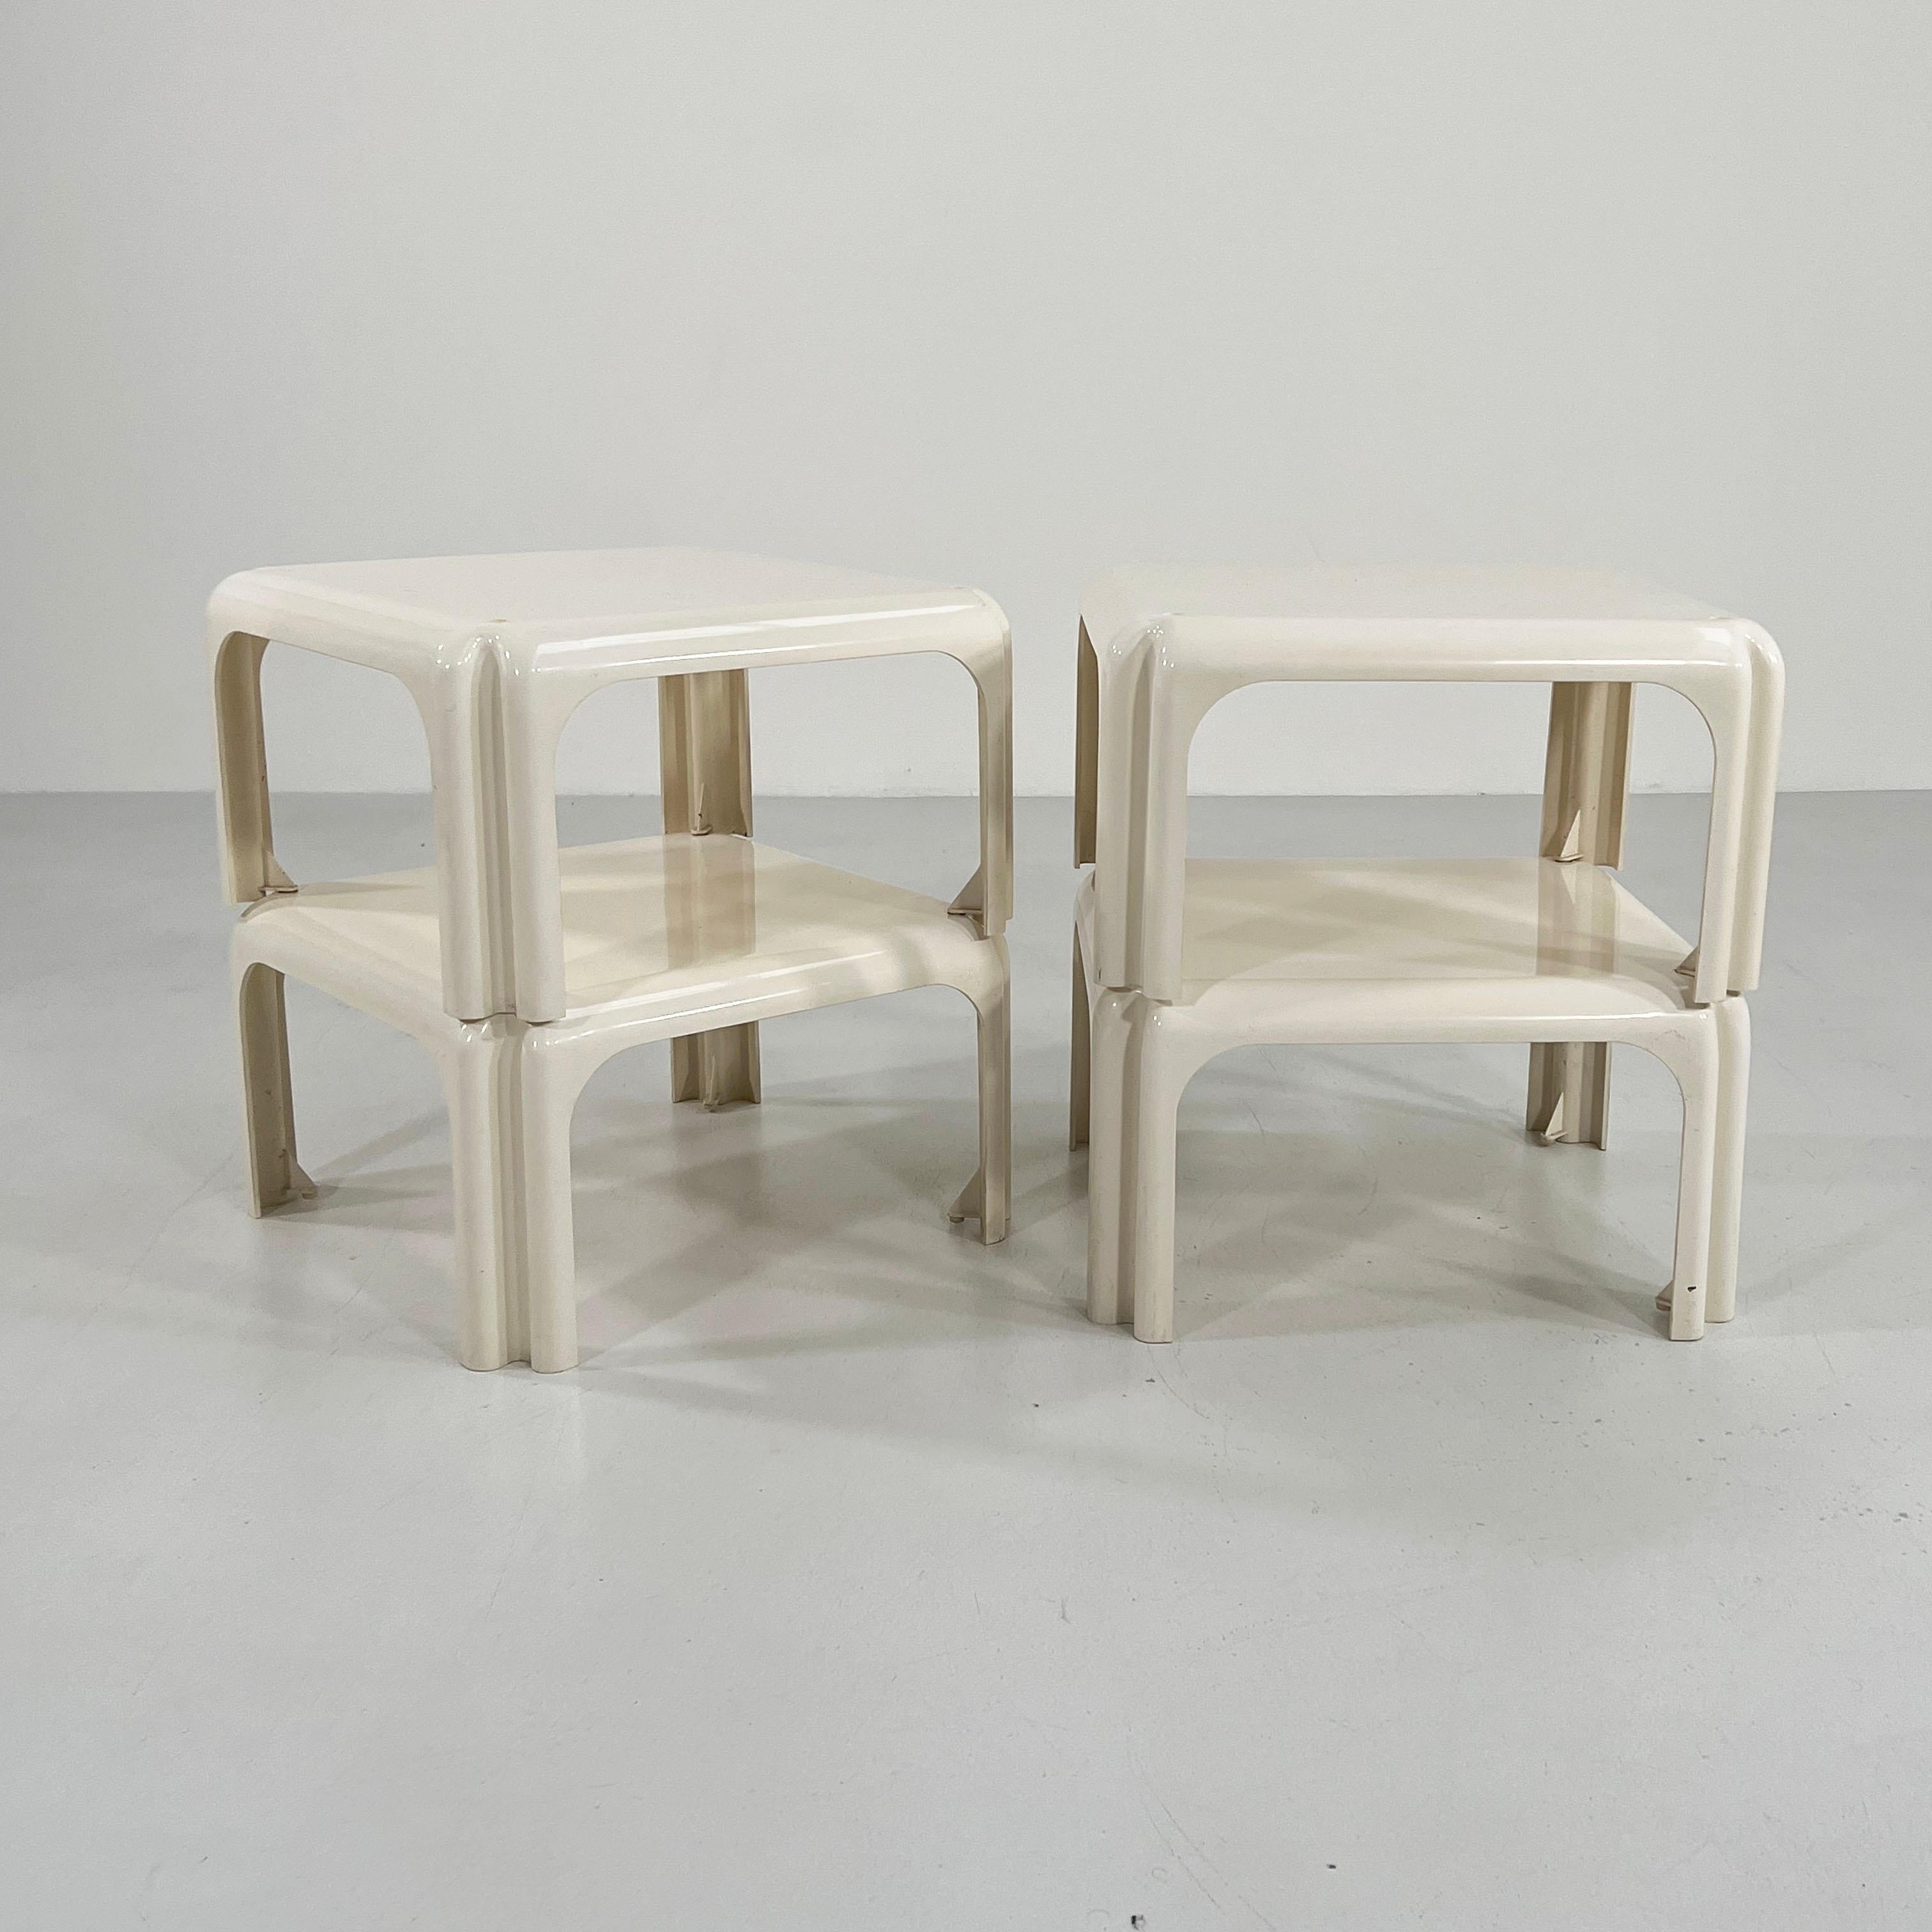 Post-Modern Set of 4 Elena Stacking Tables by Vico Magistretti for Artemide, 1970s